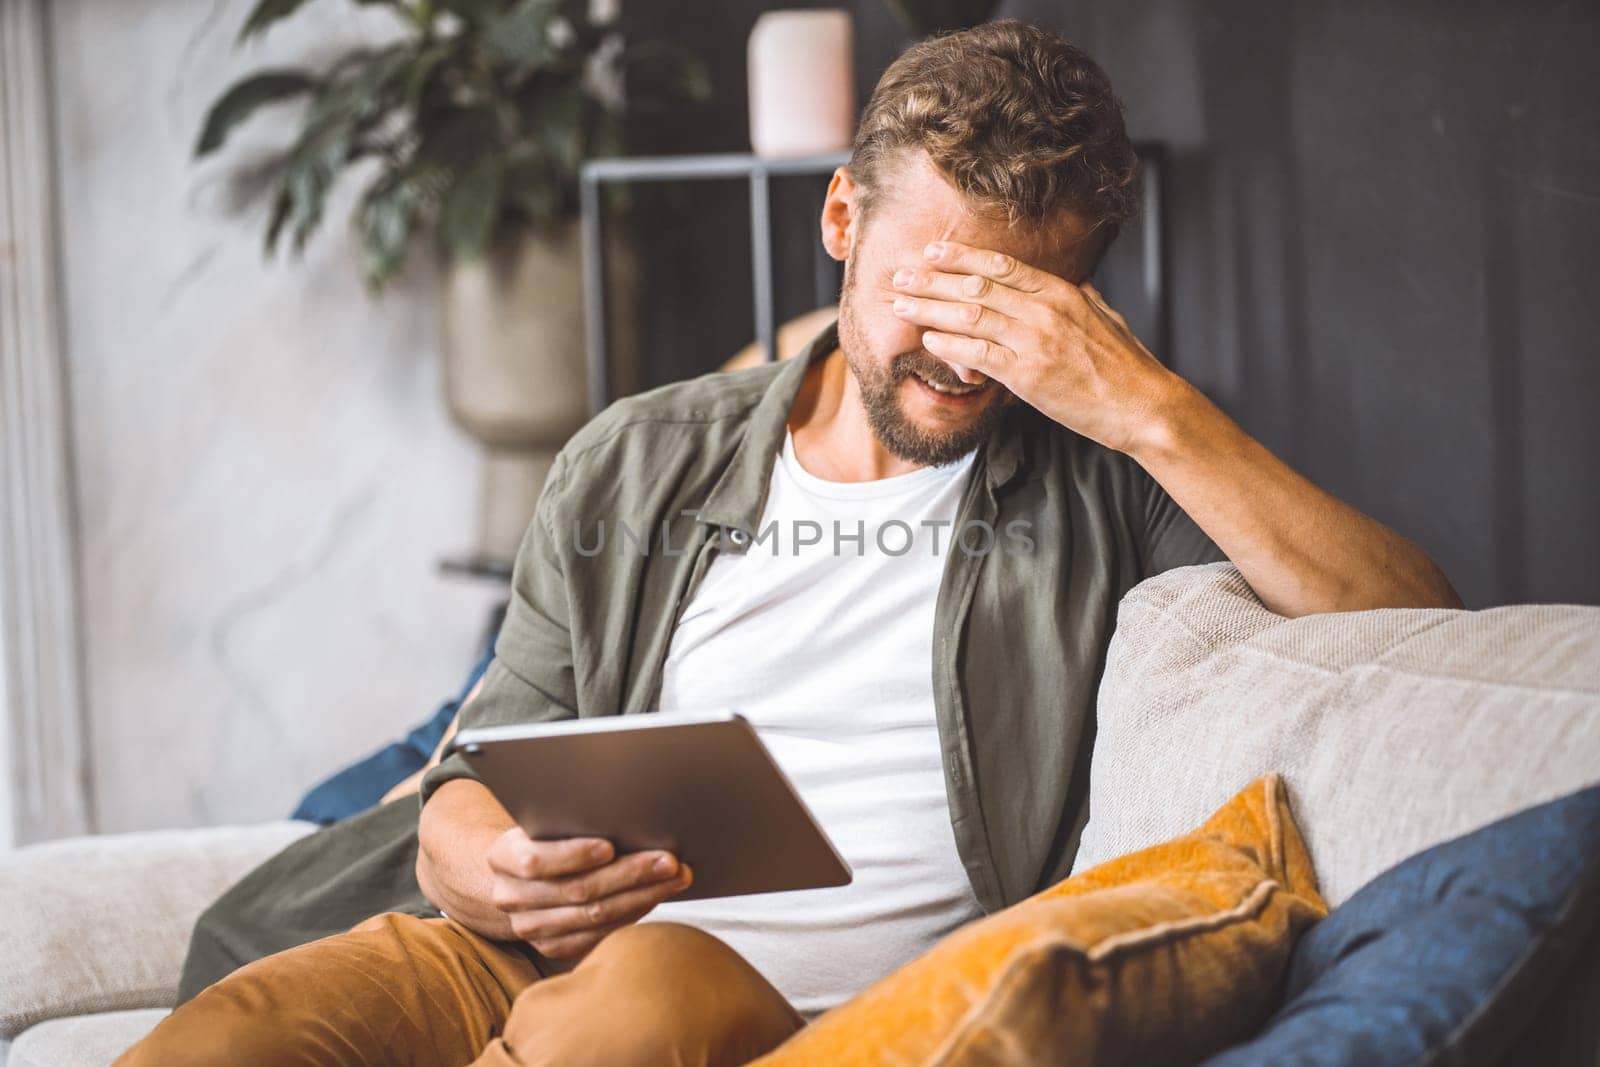 Sad man sitting on sofa home, holding tablet PC, making facepalm gesture. Frustration and disappointment on face palpable, as if something has gone wrong with technology or communication through internet. High quality photo